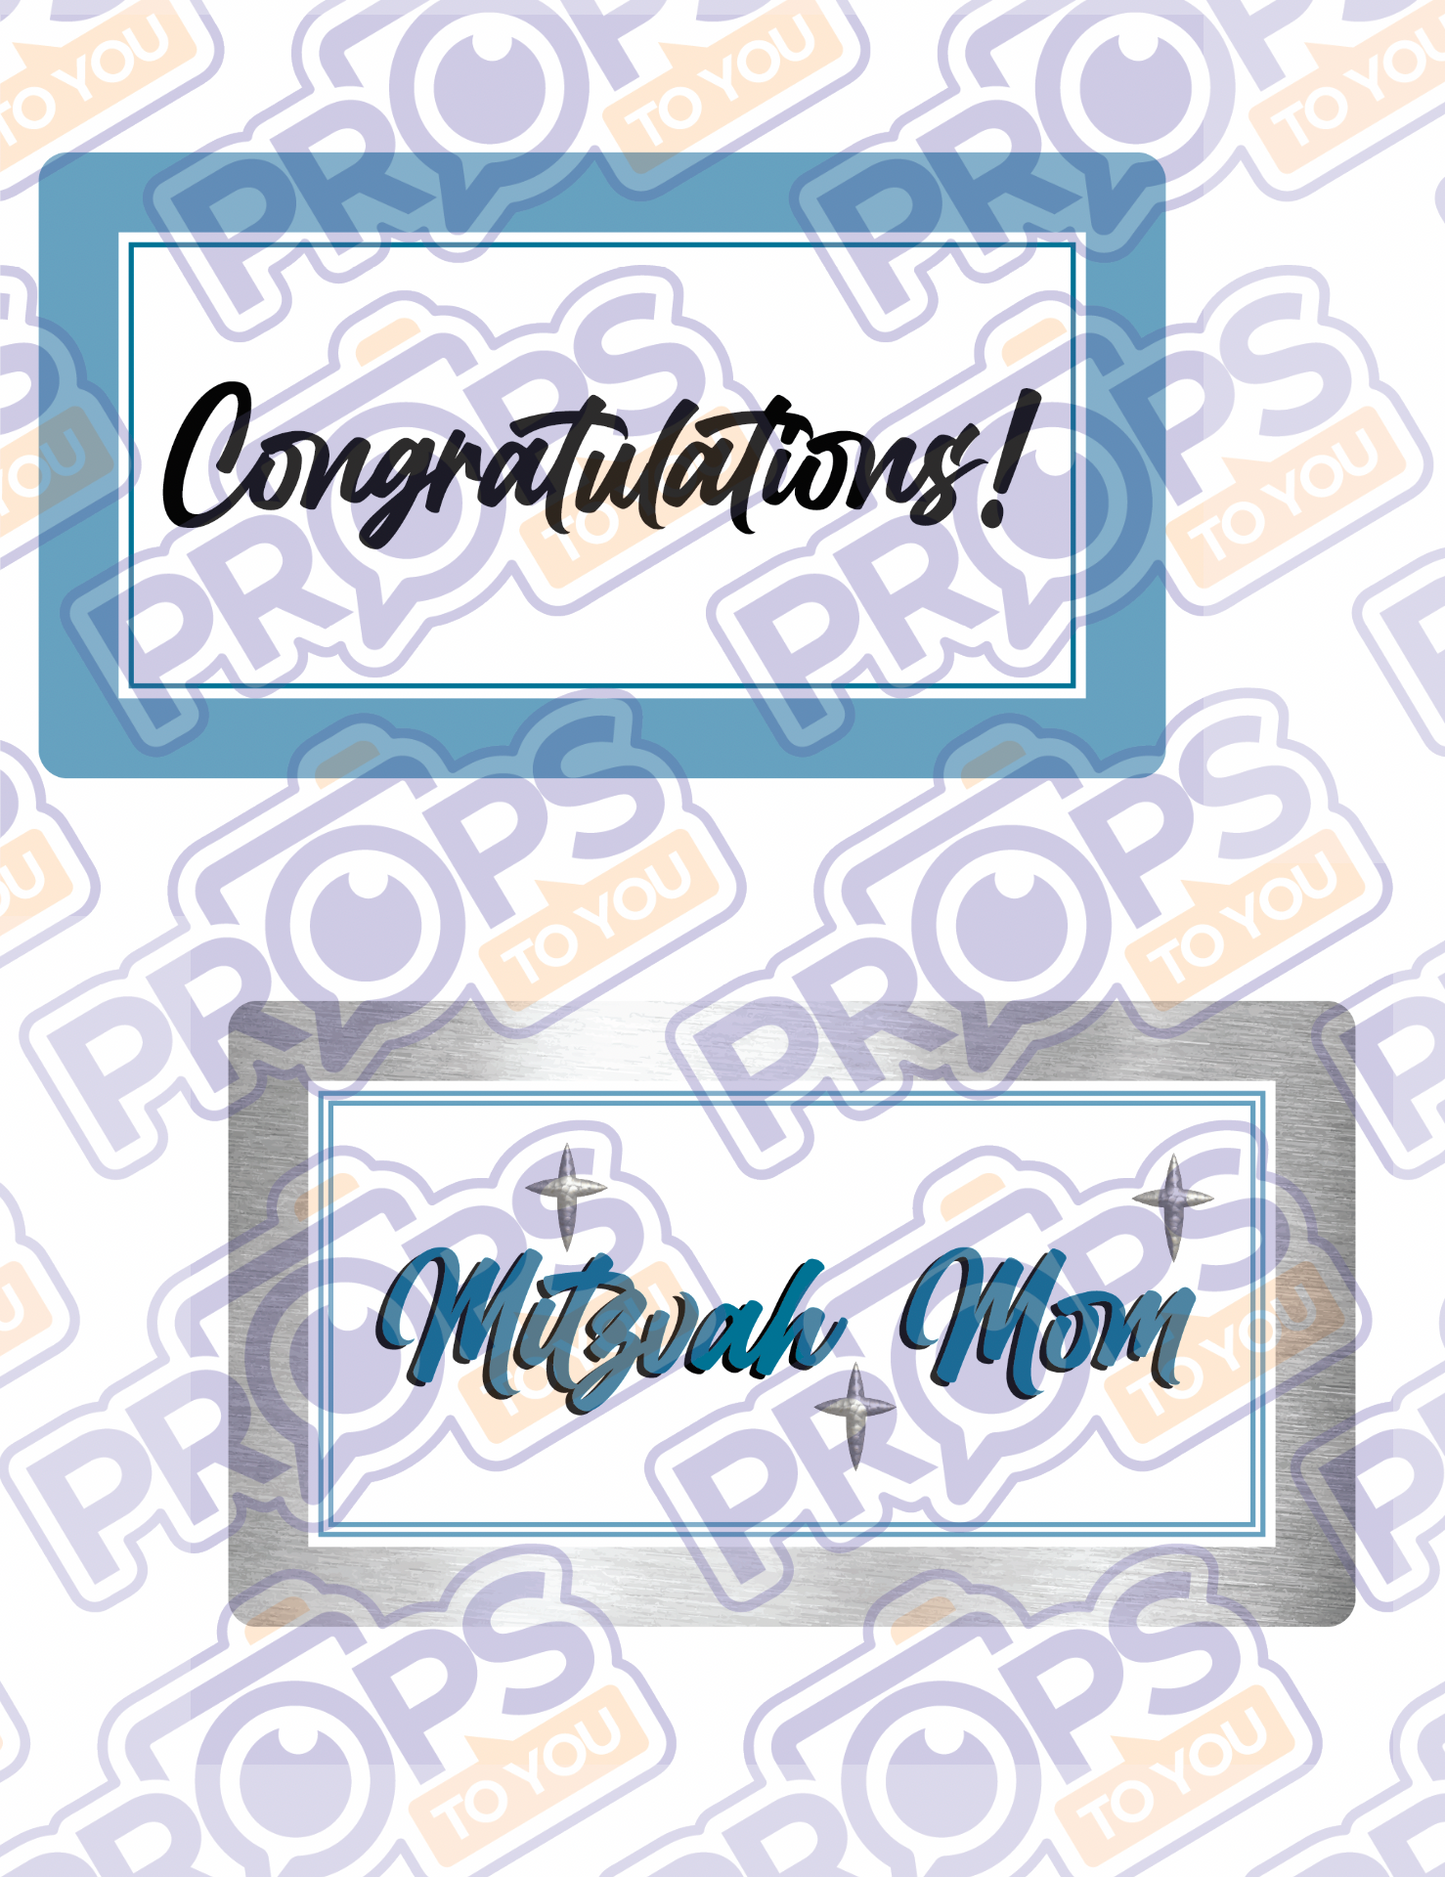 BUNDLE! Mitzvah - 5 Double-Sided Photo Booth Props